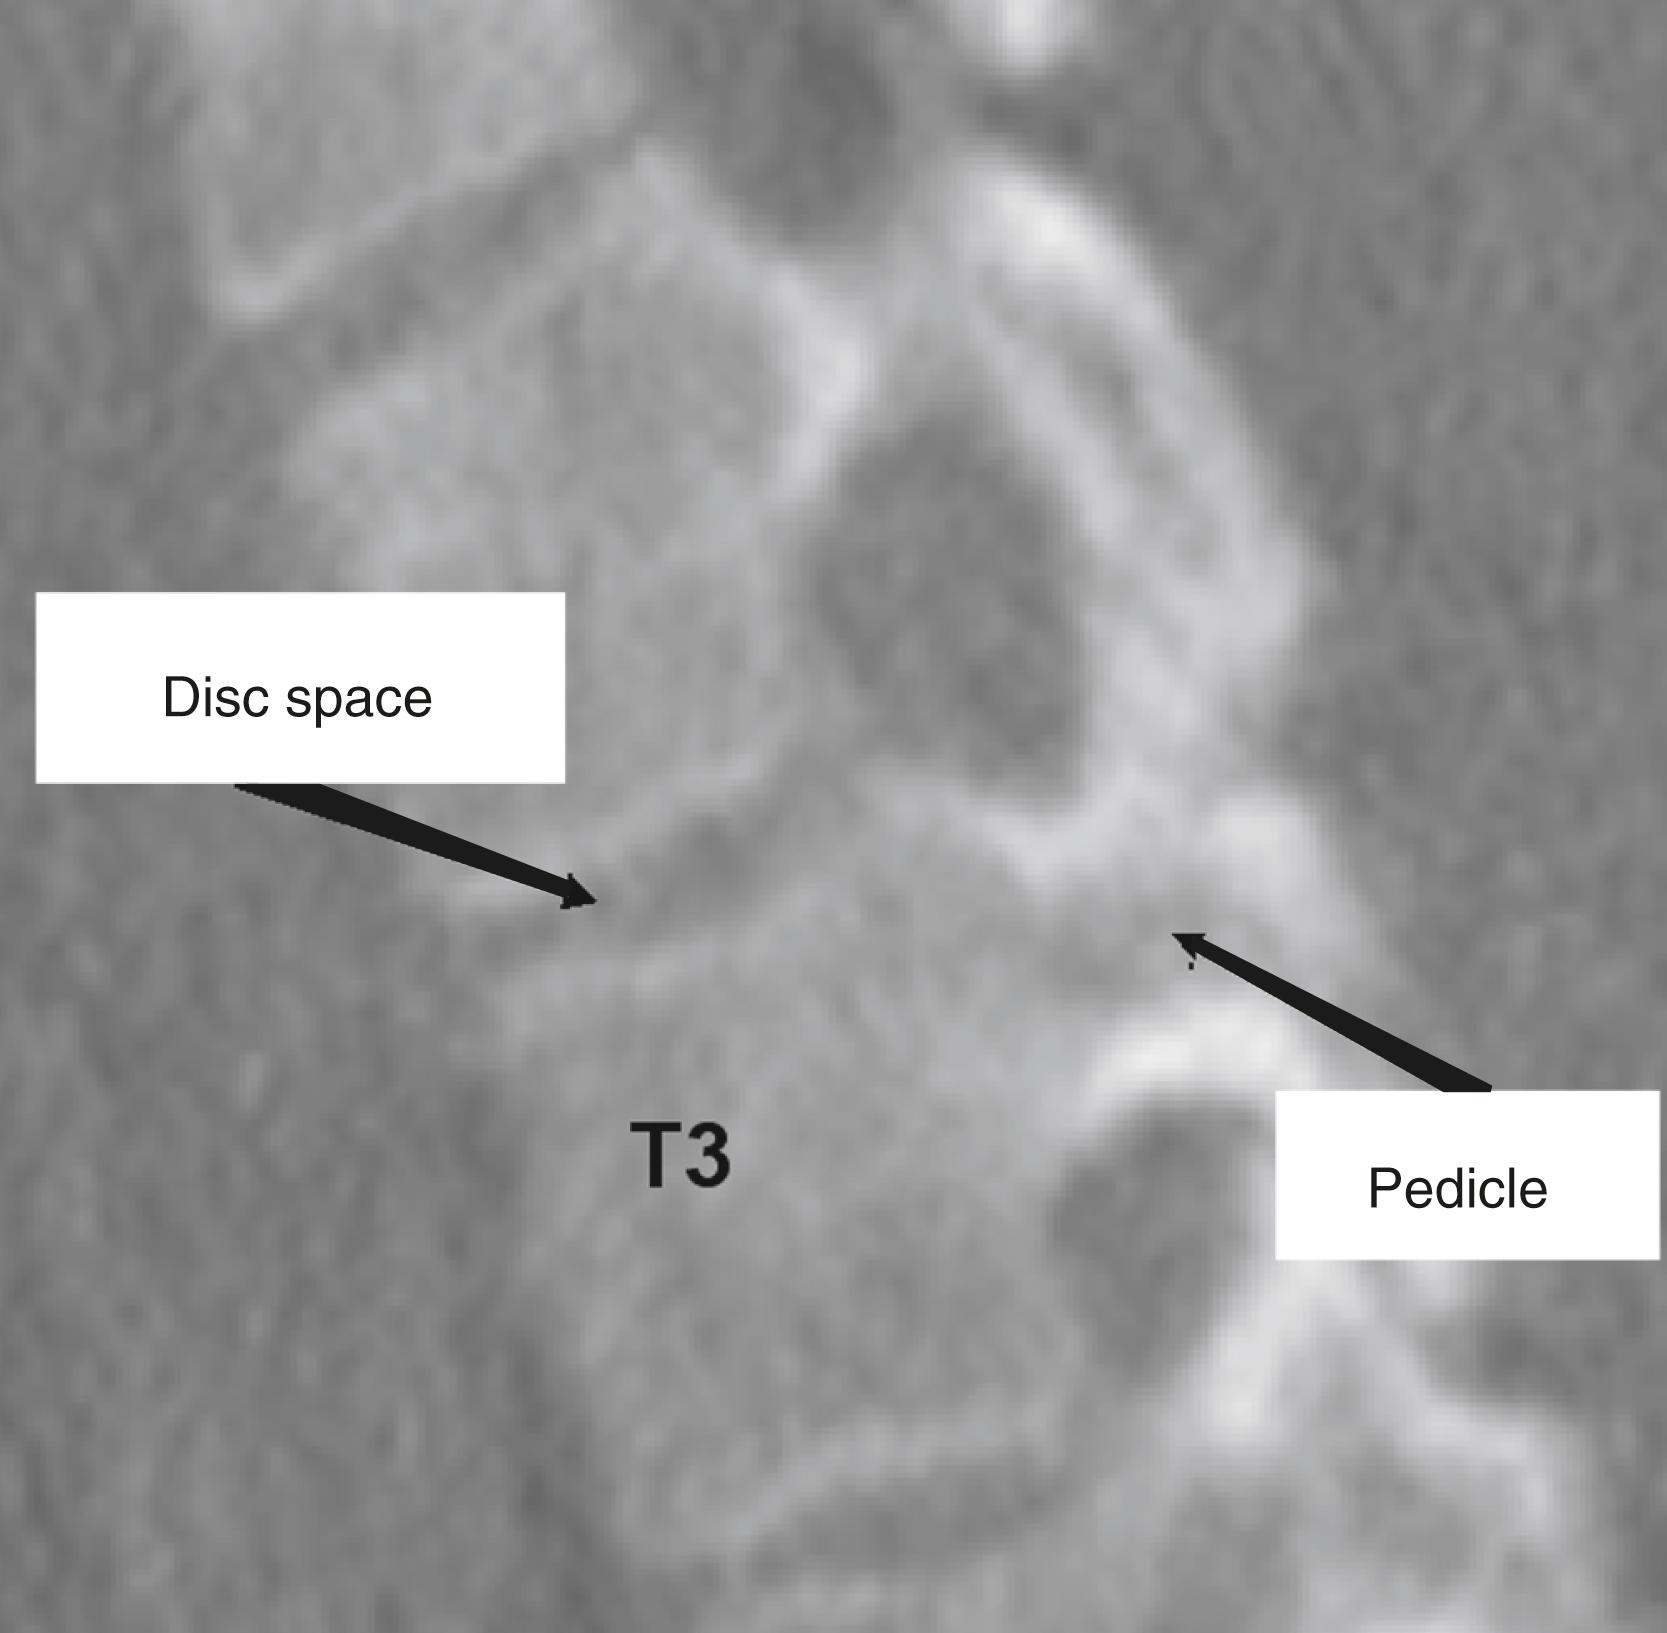 Fig. 167.3, Sagittal computed tomography reformatted image of the T2 and T3 vertebral bodies illustrating the relationship of the pedicle to the intervertebral disc space in the thoracic spine.